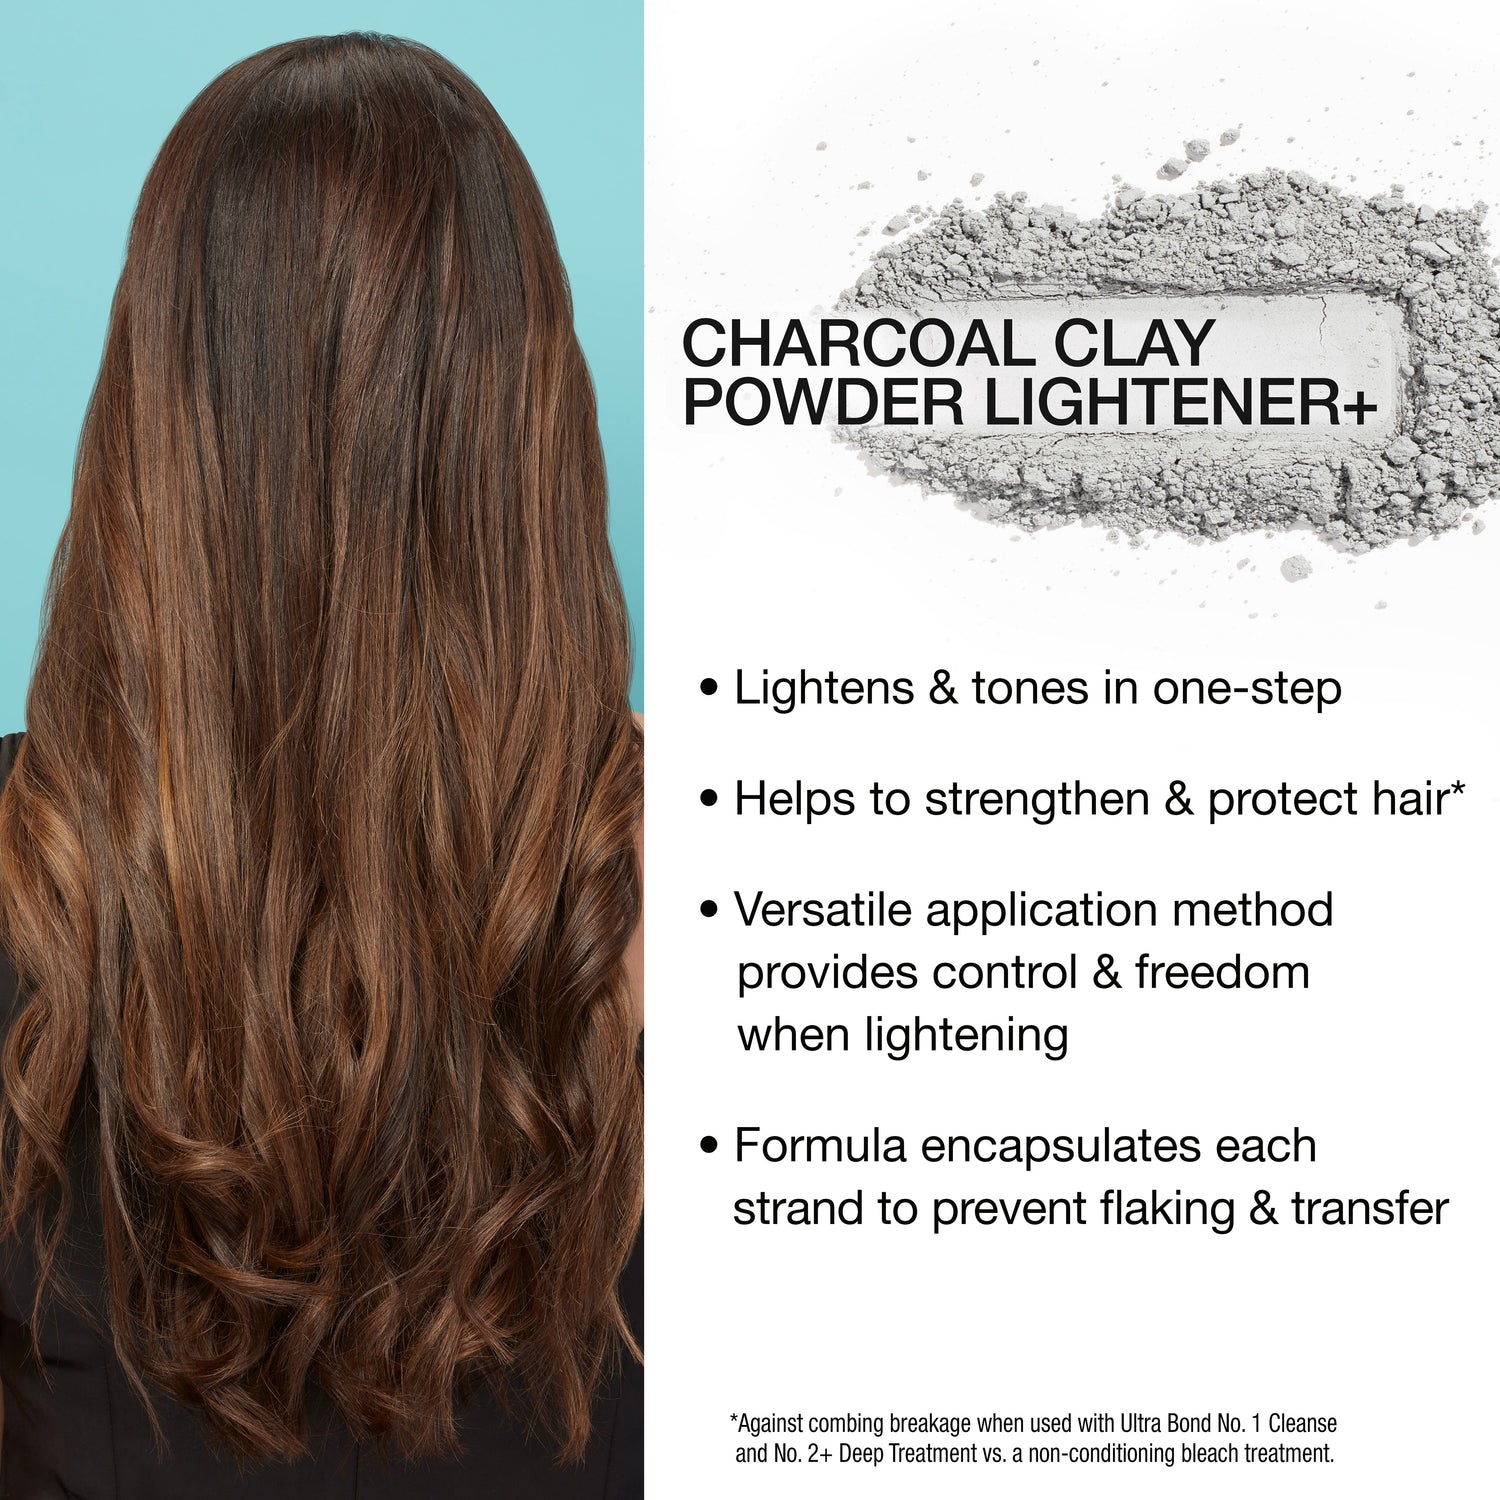 Lightens and tones in one-step. Helps to strengthen and protect hair (against combing breakage used with Ultra Bond No. 1 Cleanse and No. 2. Deep Treatment vs. a non-conditioning bleach treatment). Versatile application method provides control and freedom when lightening. Formula encapsulates each strand to prevent flaking and transfer.